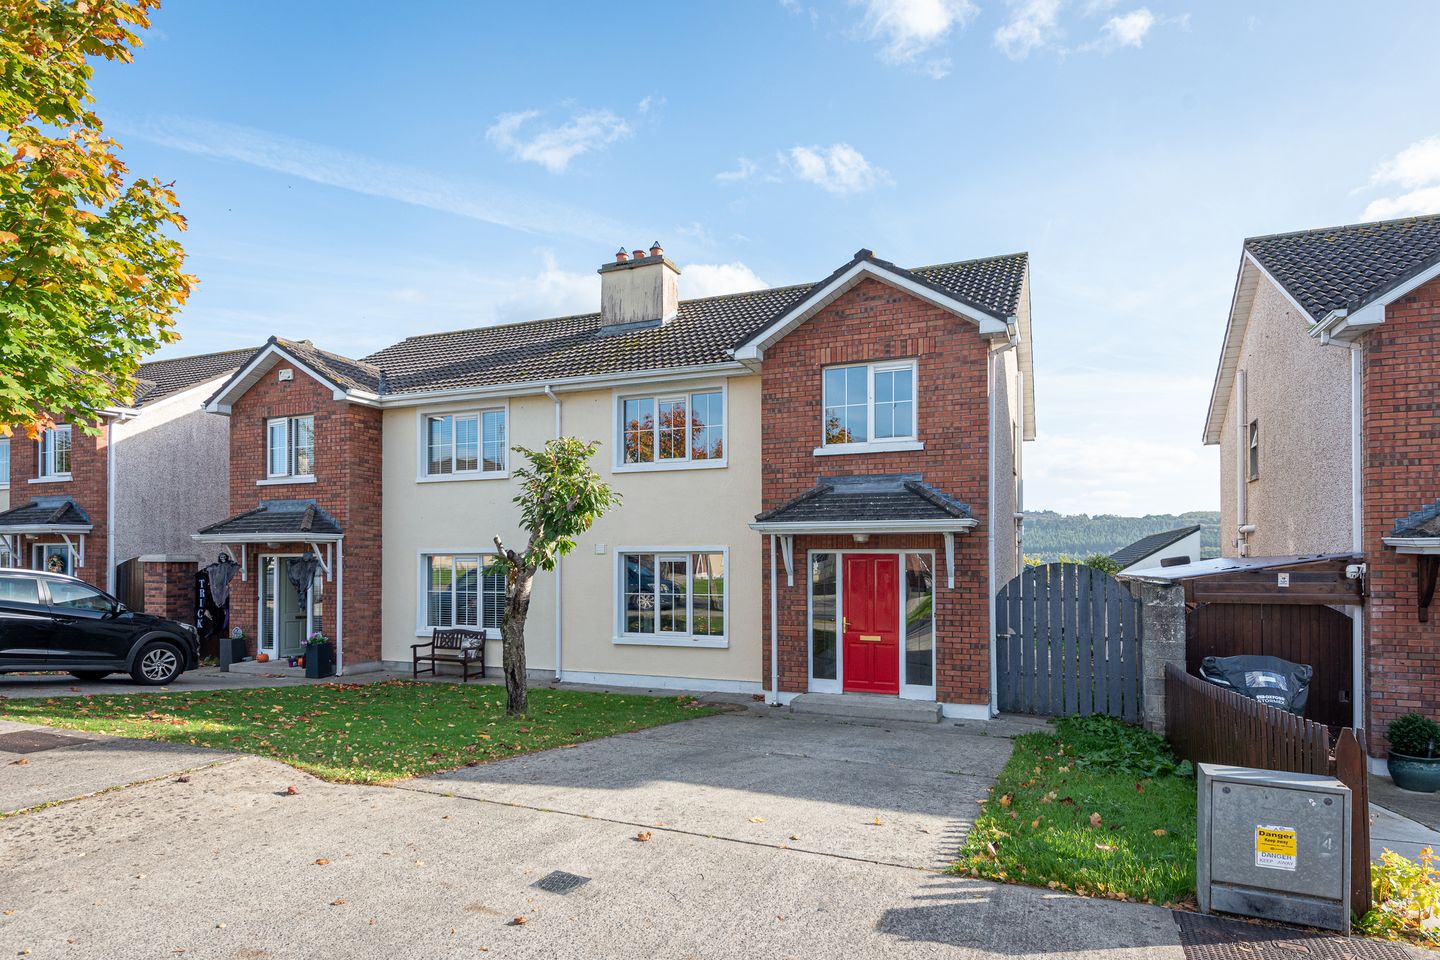 20 Sycamore Close, Green Hill Village, Carrick-on-Suir, Co. Tipperary